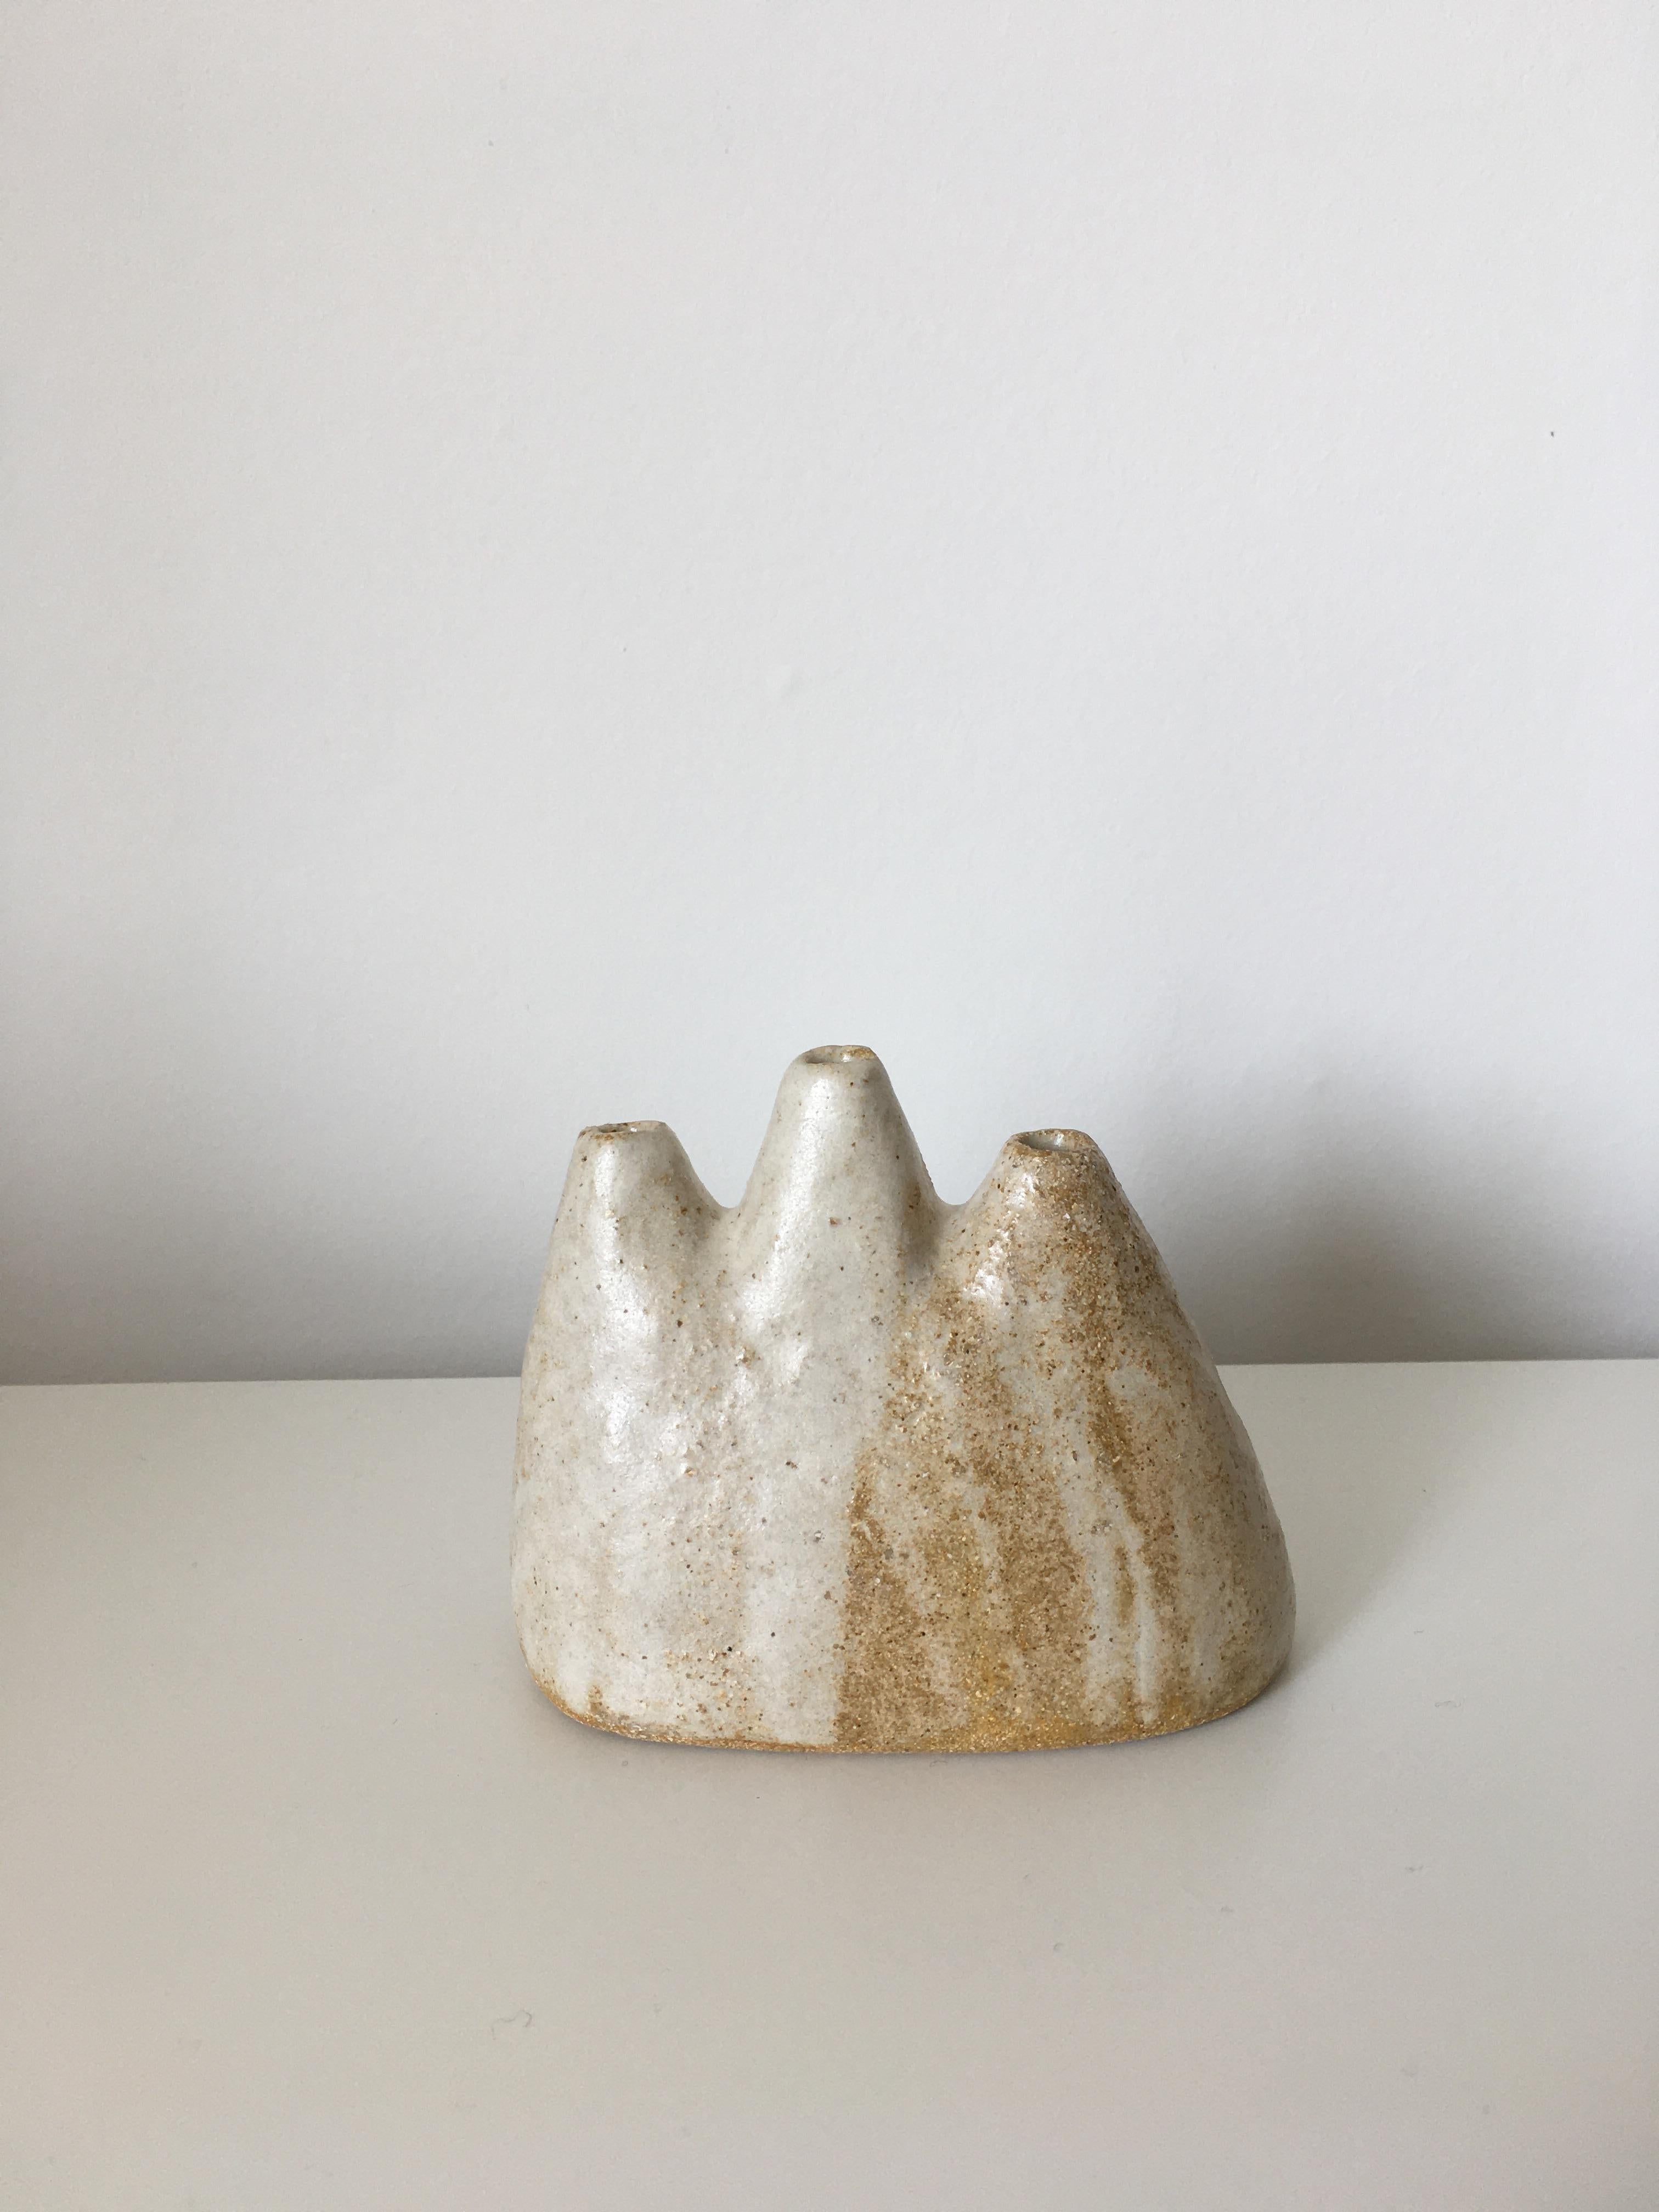 No.8 Stoneware sculpture, Tonfisk by Ciona Lee 
One of a Kind
Dimensions: W 11 x D 5.5 x H 9 cm
Materials: Grogged stoneware, Satin Cream Glaze
Variations of size and colour available.

Tonfisk is the ceramic practice by Ciona Lee, a